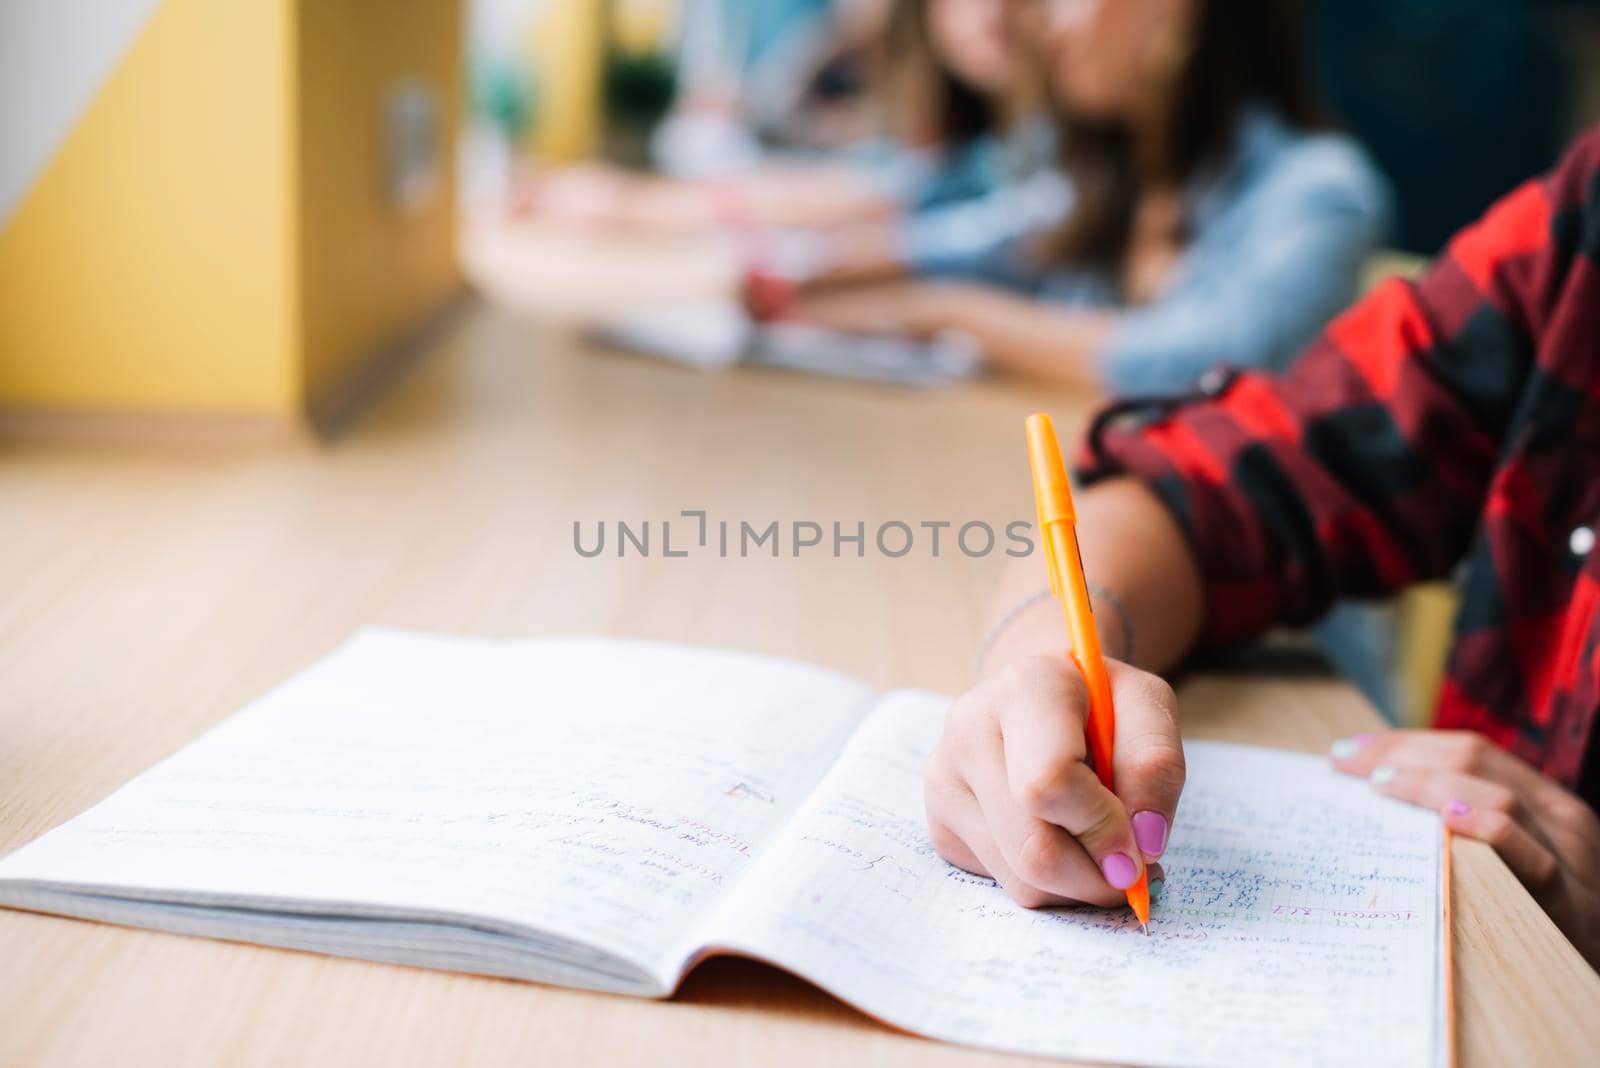 anonymous student taking notes by Zahard